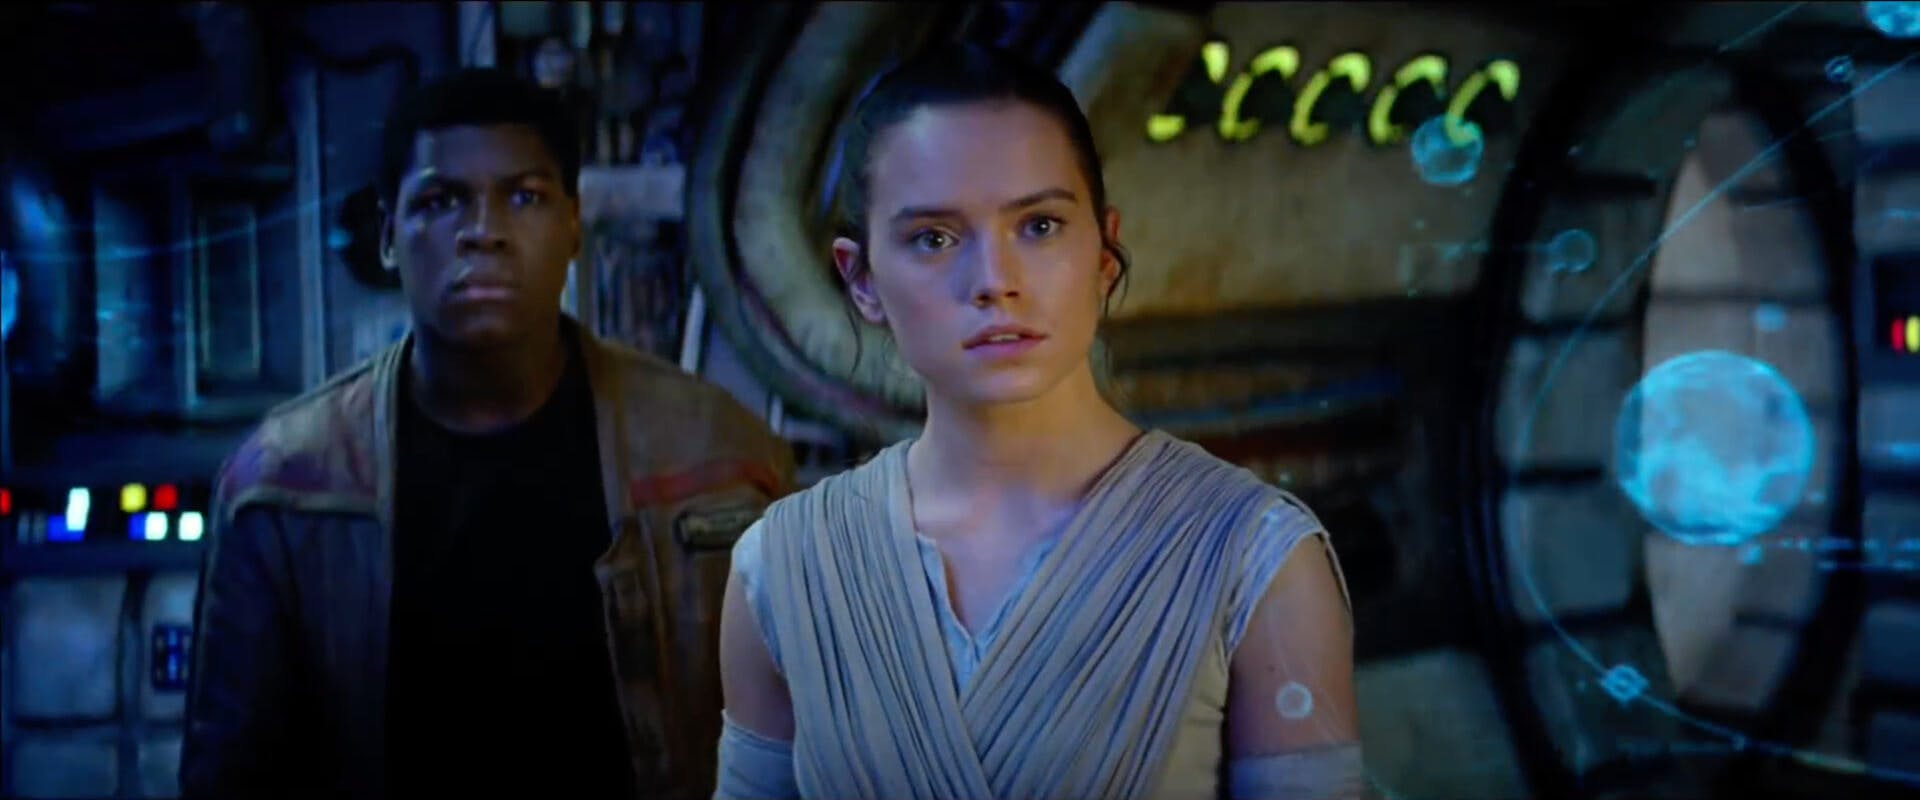 The Force Awakens - Rey and Finn